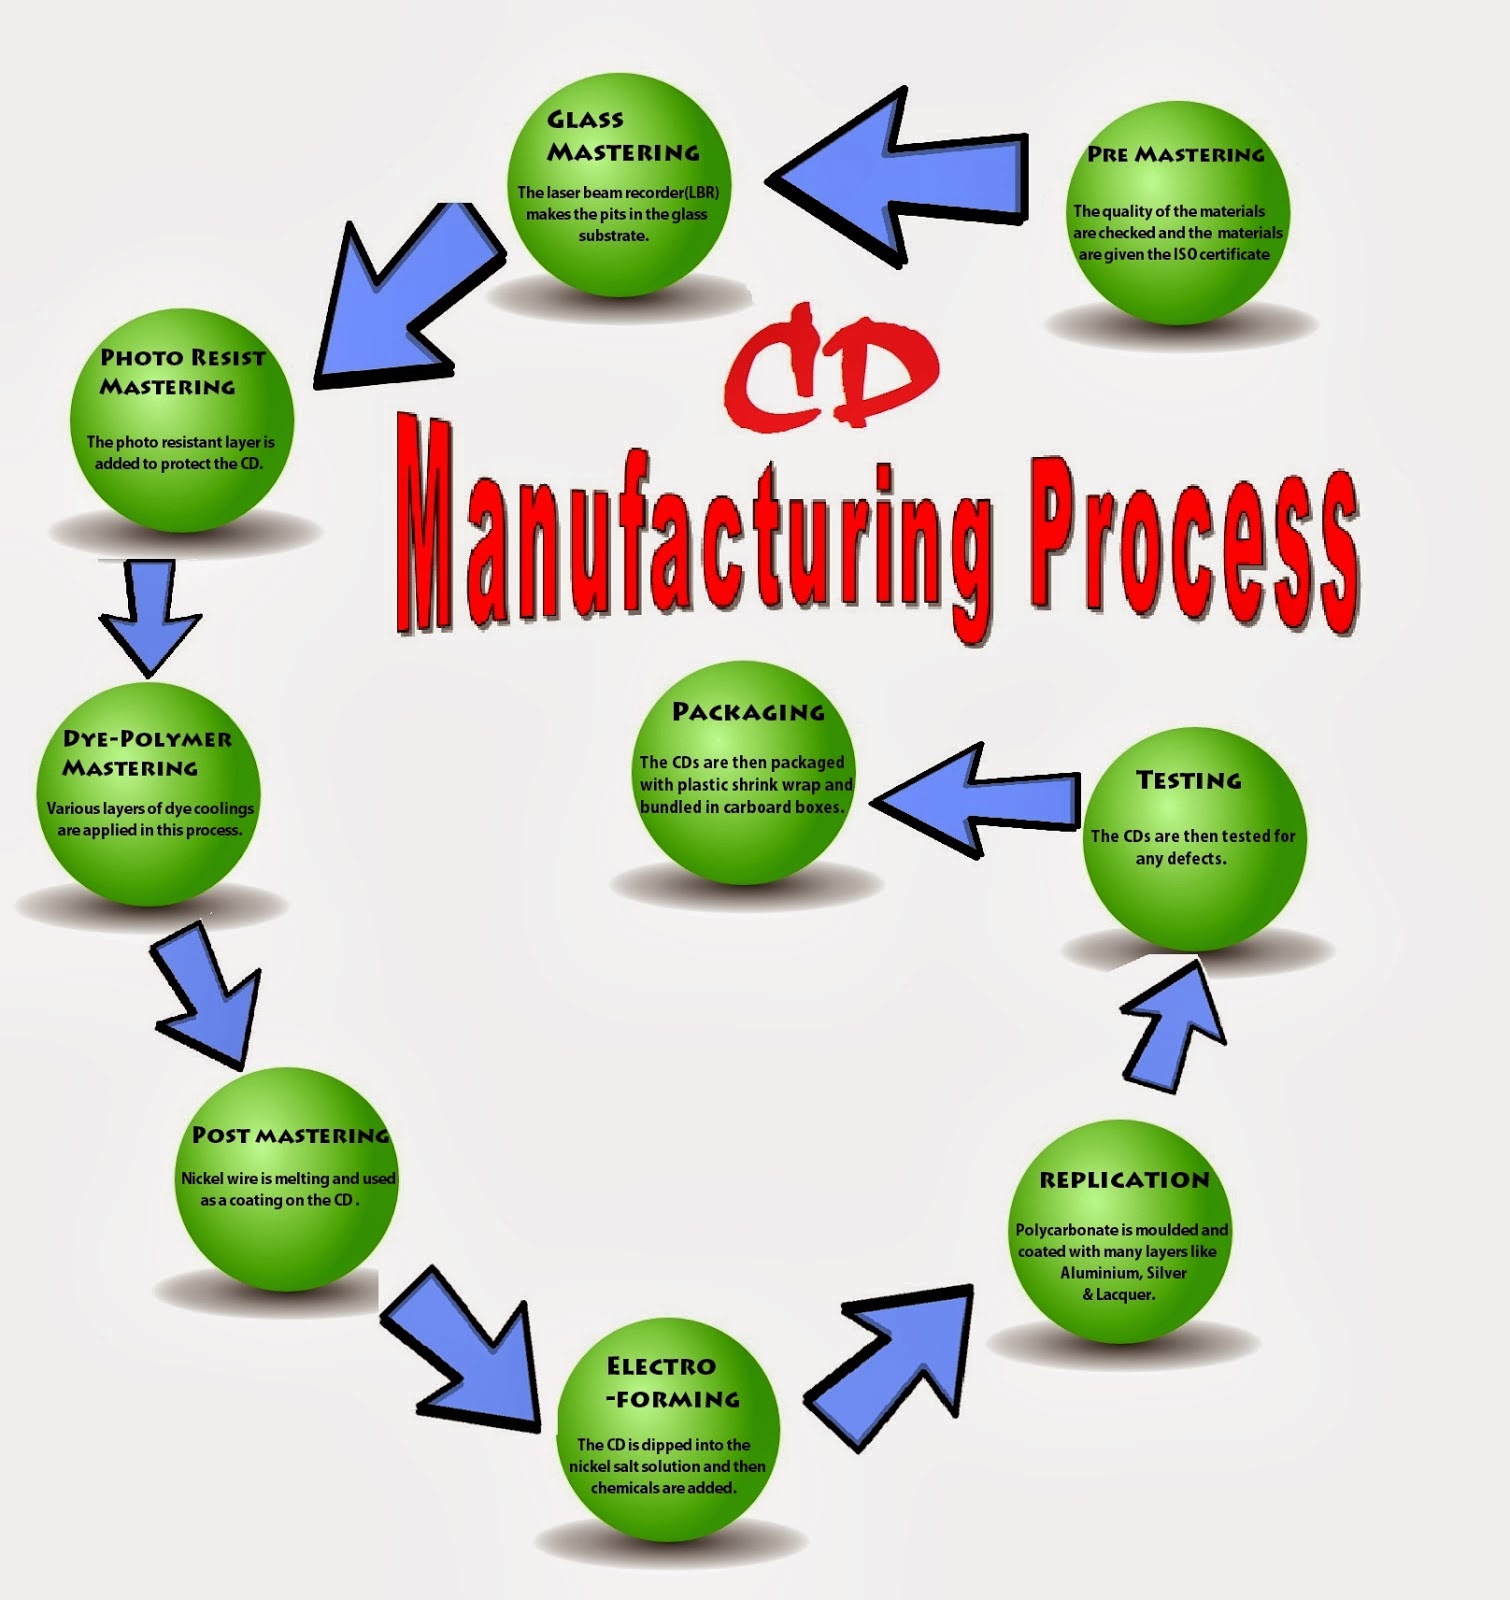 The Manufacturing Process